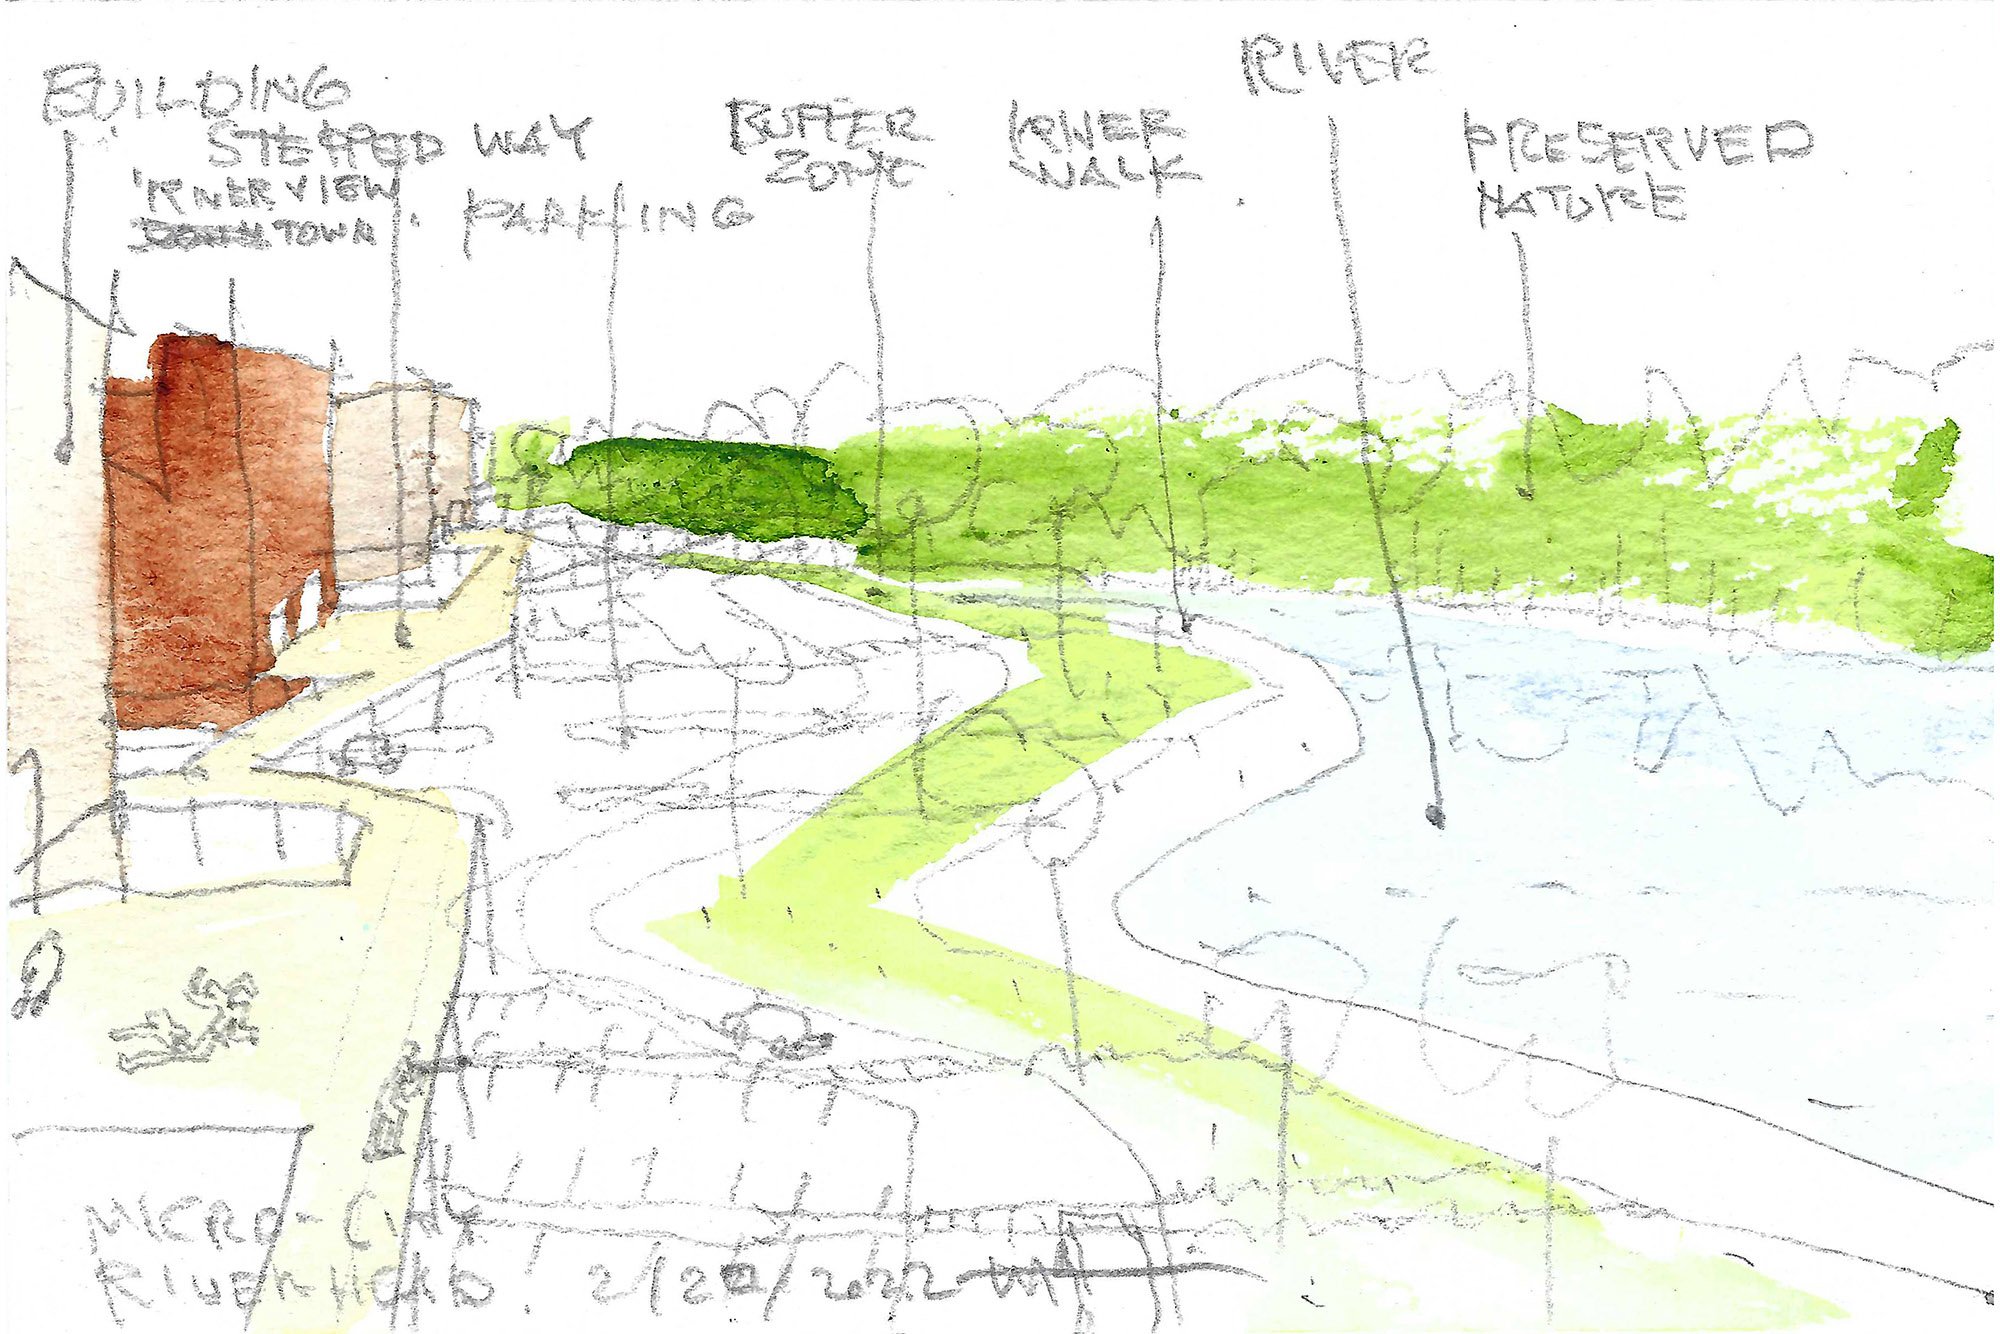  Single sided Micro City applied on Riverhead Downtown: “River view Terrace”. 